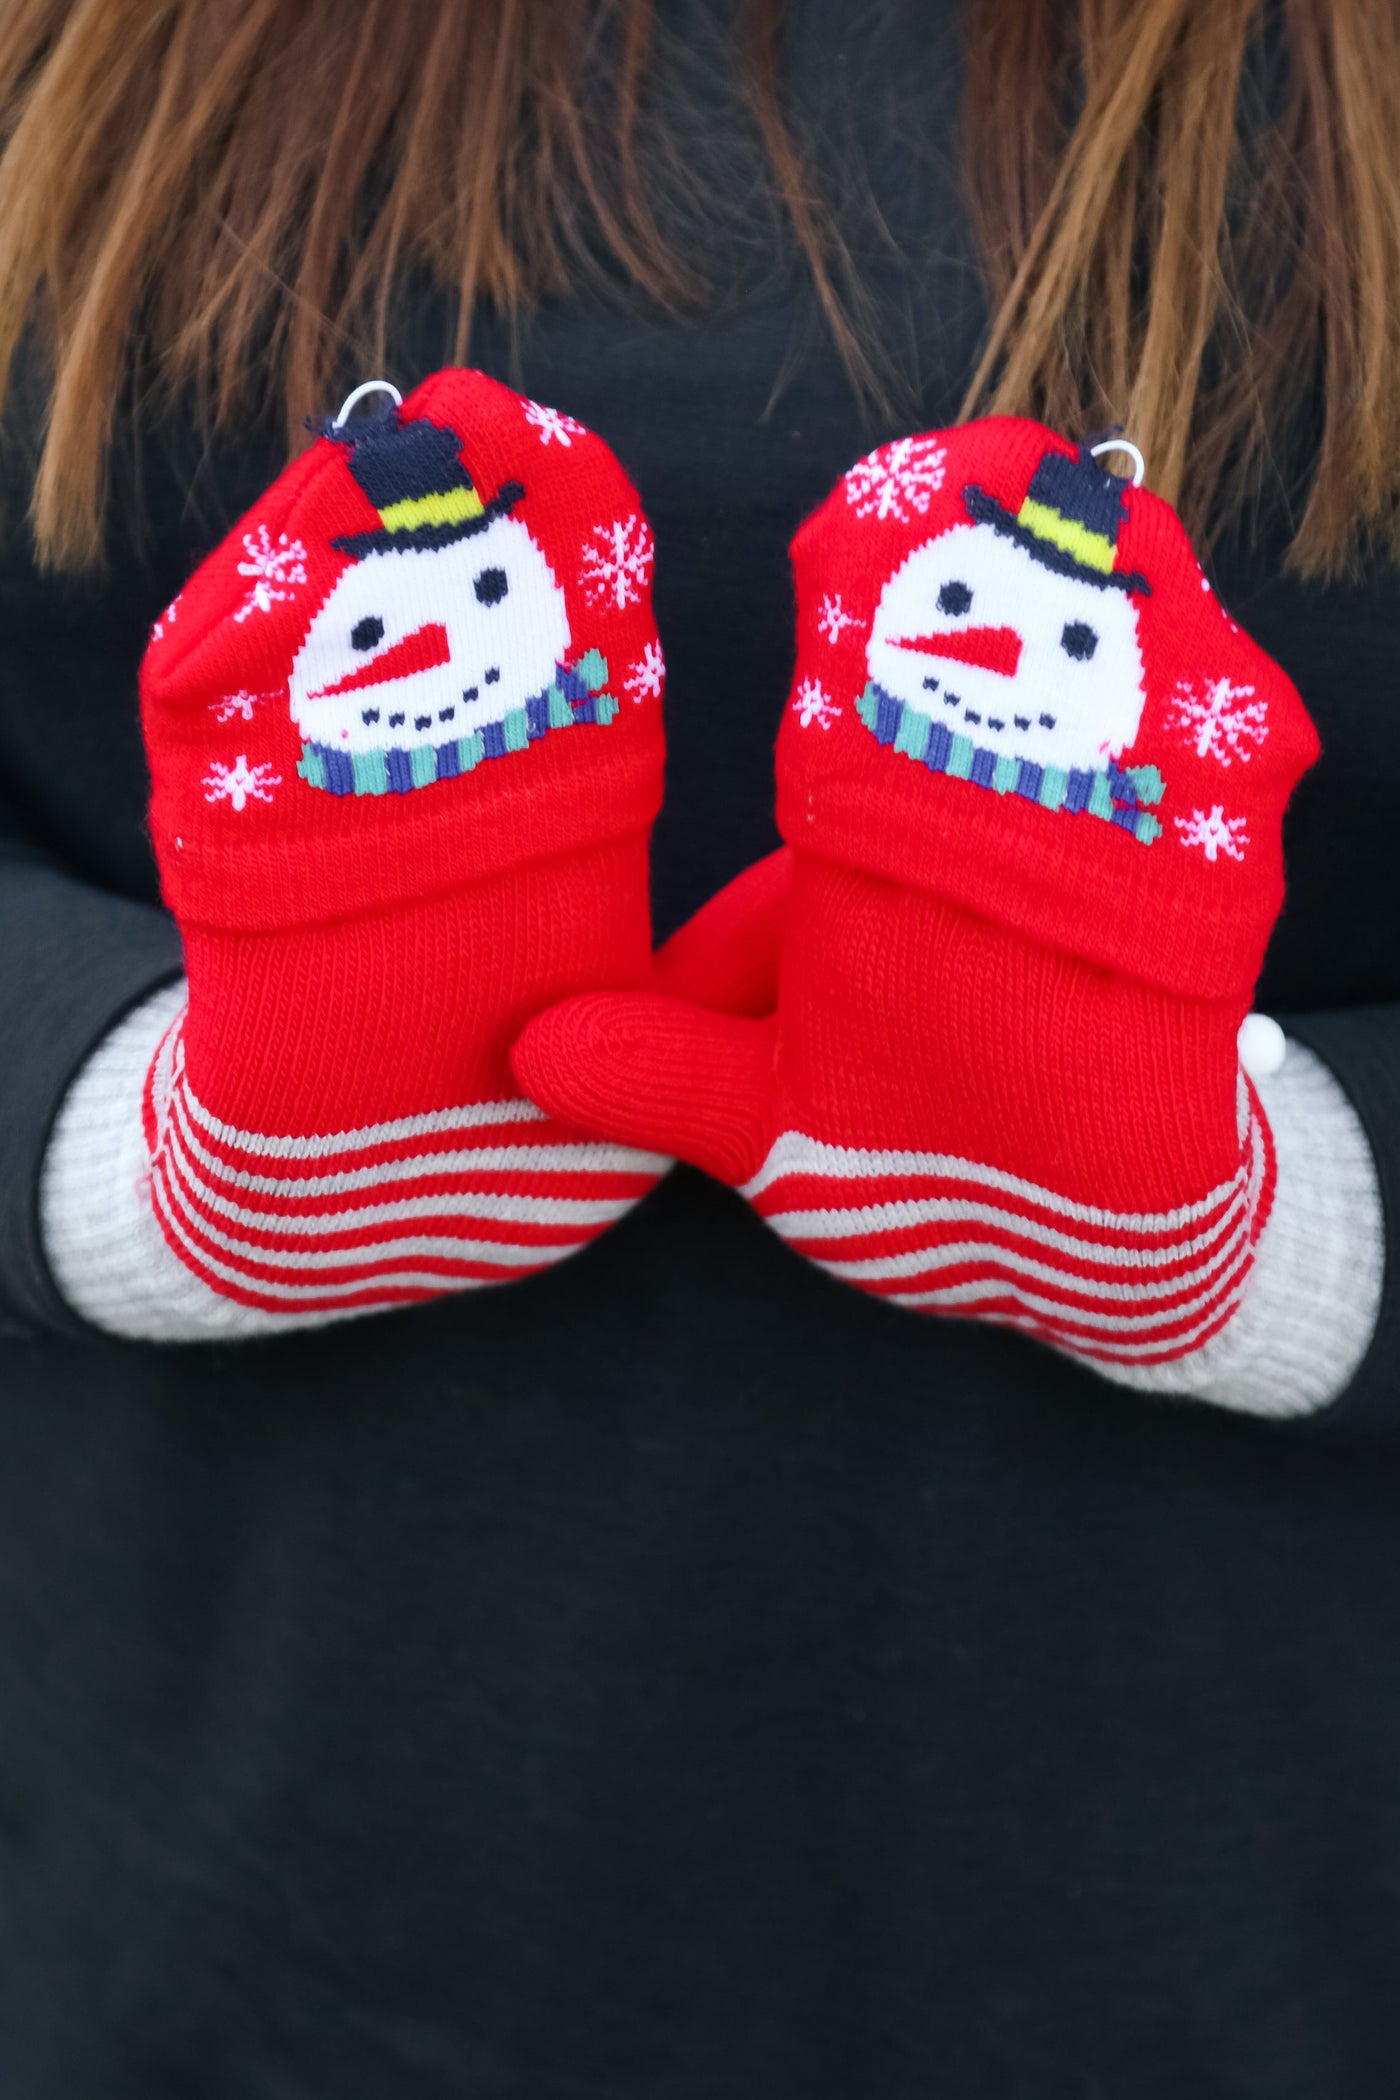 Snowman Fingerless Gloves with Convertible Mittens - Sybaritic Bags & Clothing